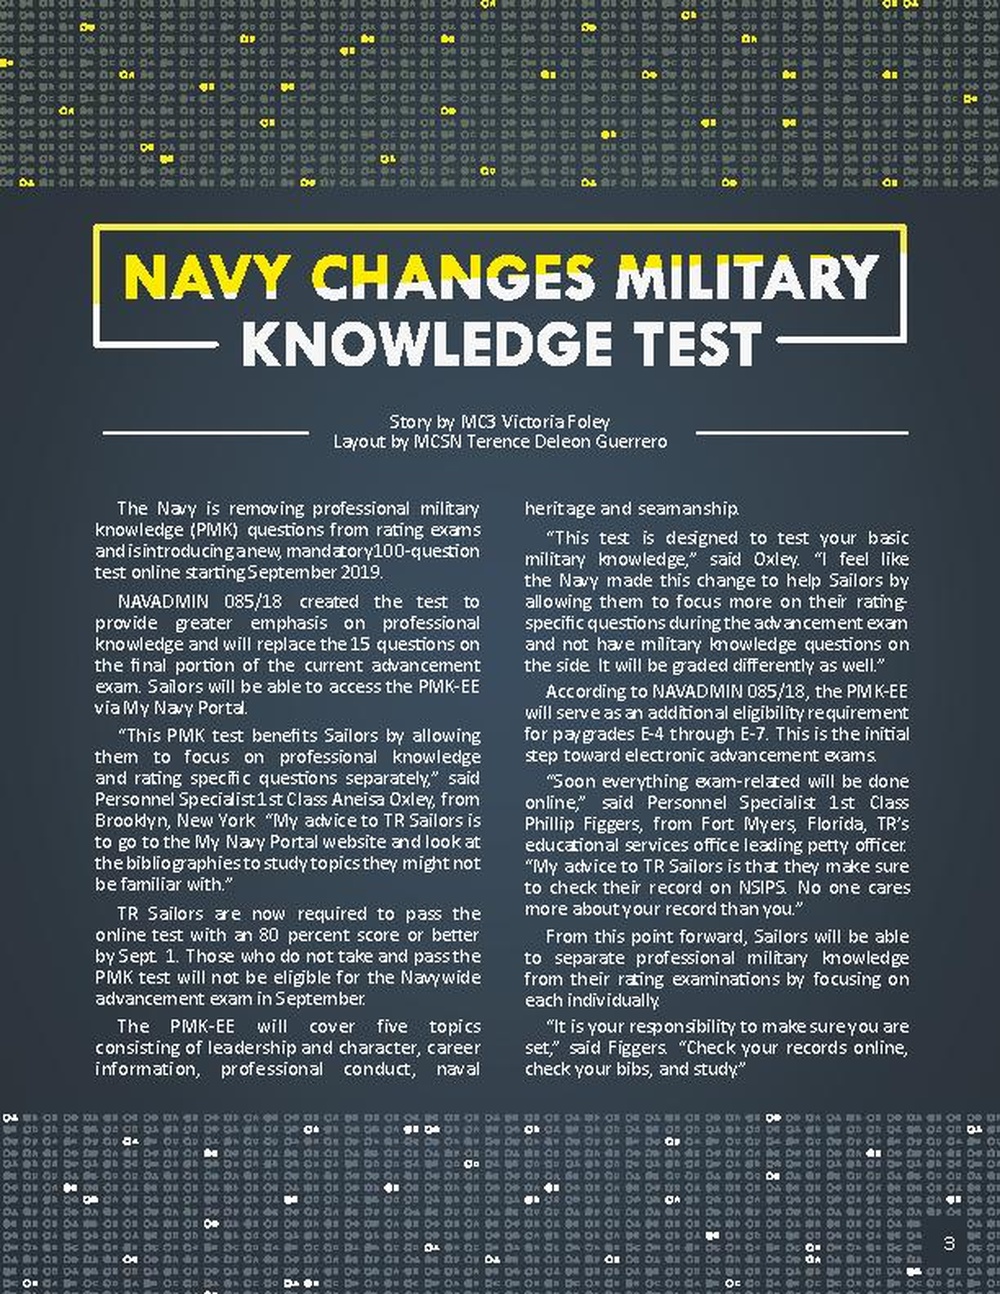 Navy Changes Military Knowledge Test